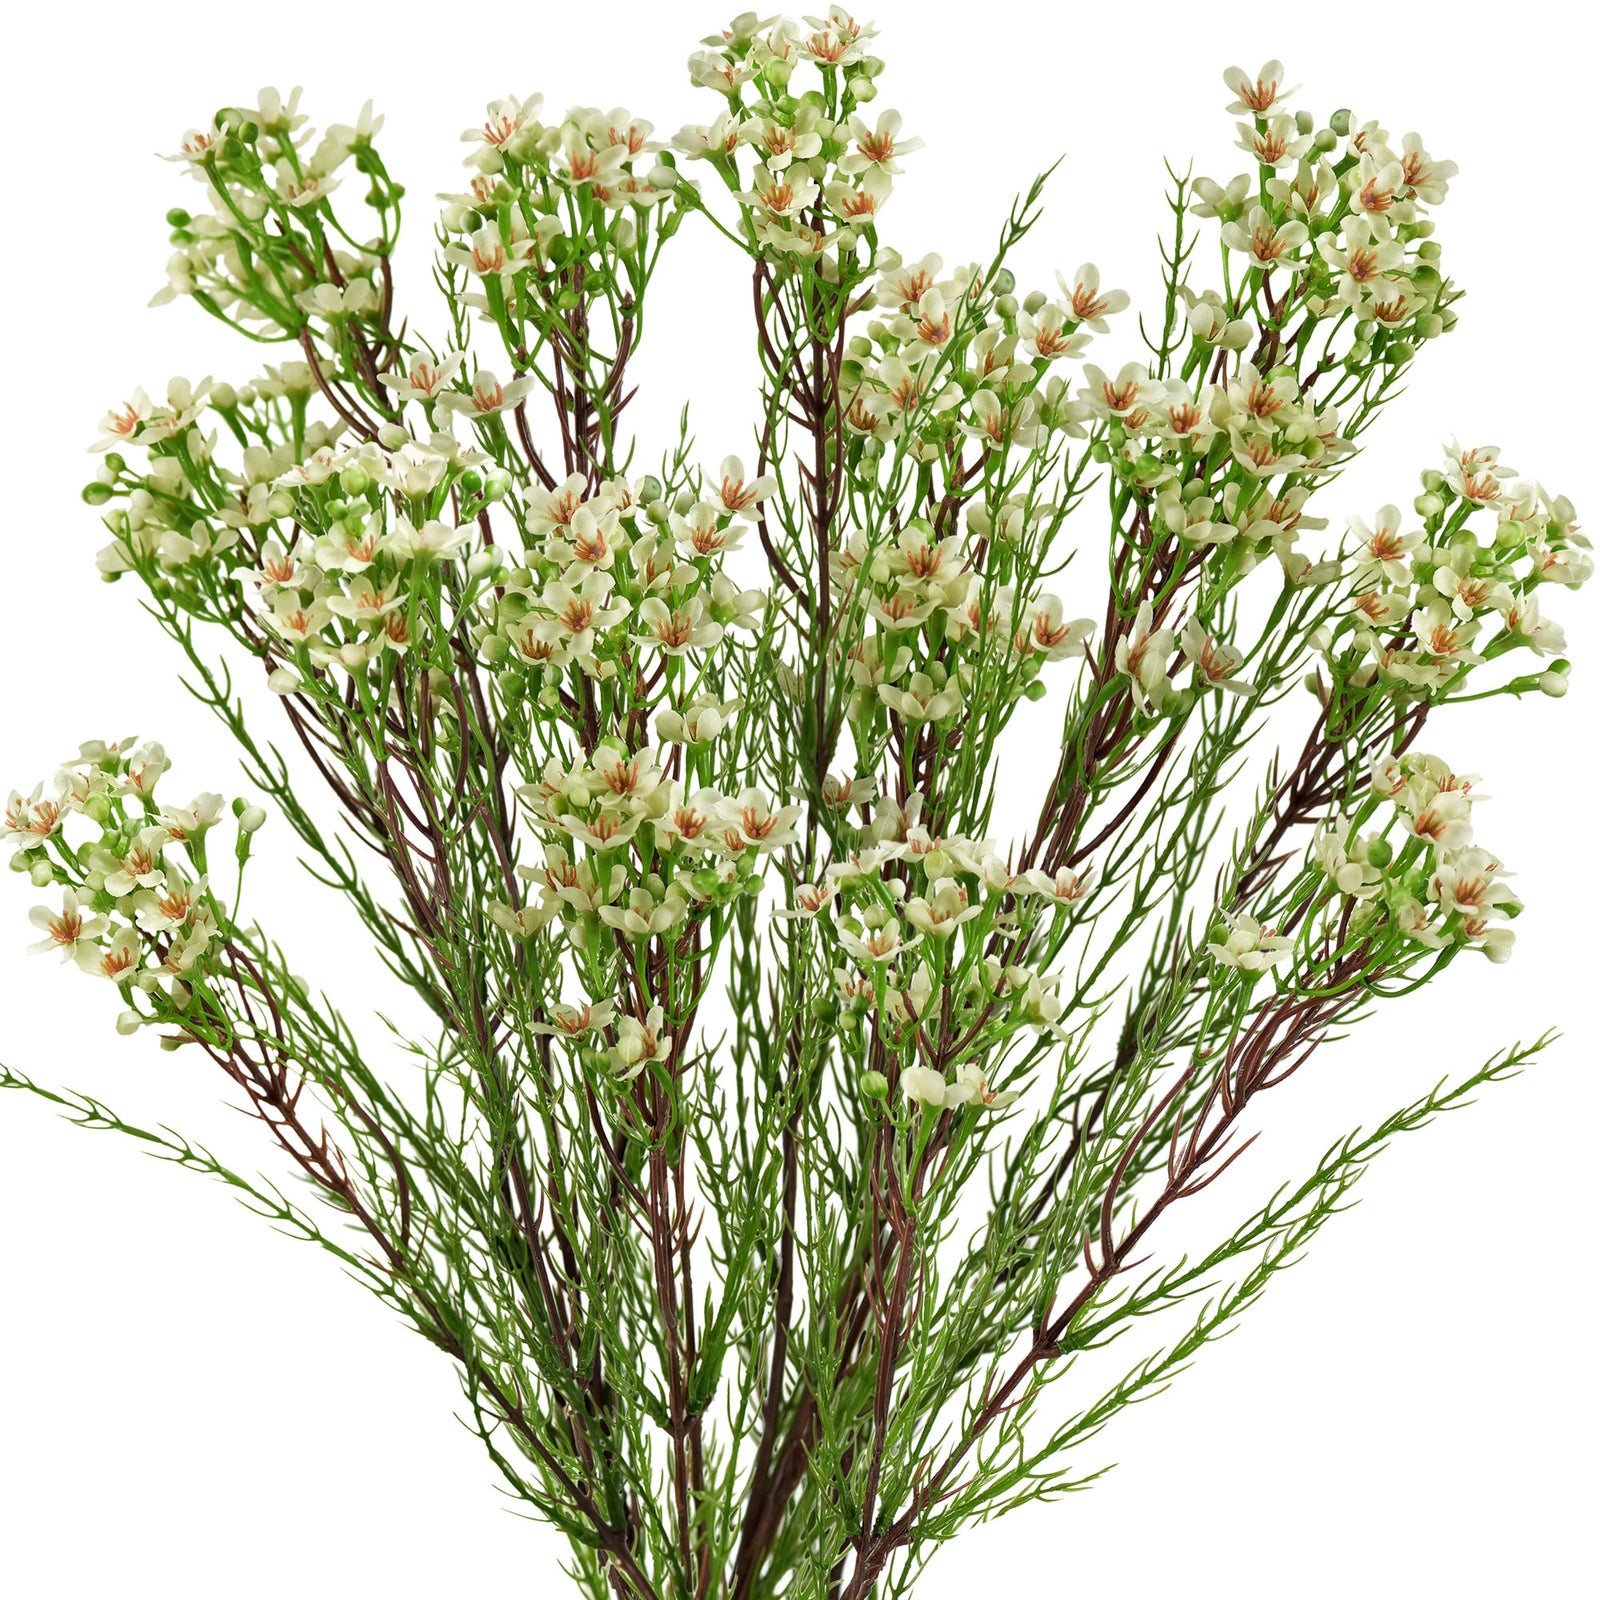 Floral White Timeless Charm Wax Flowers, Long Stem Artificial Silk Flowers 6 Stems 2.6ft (78cm) Tall